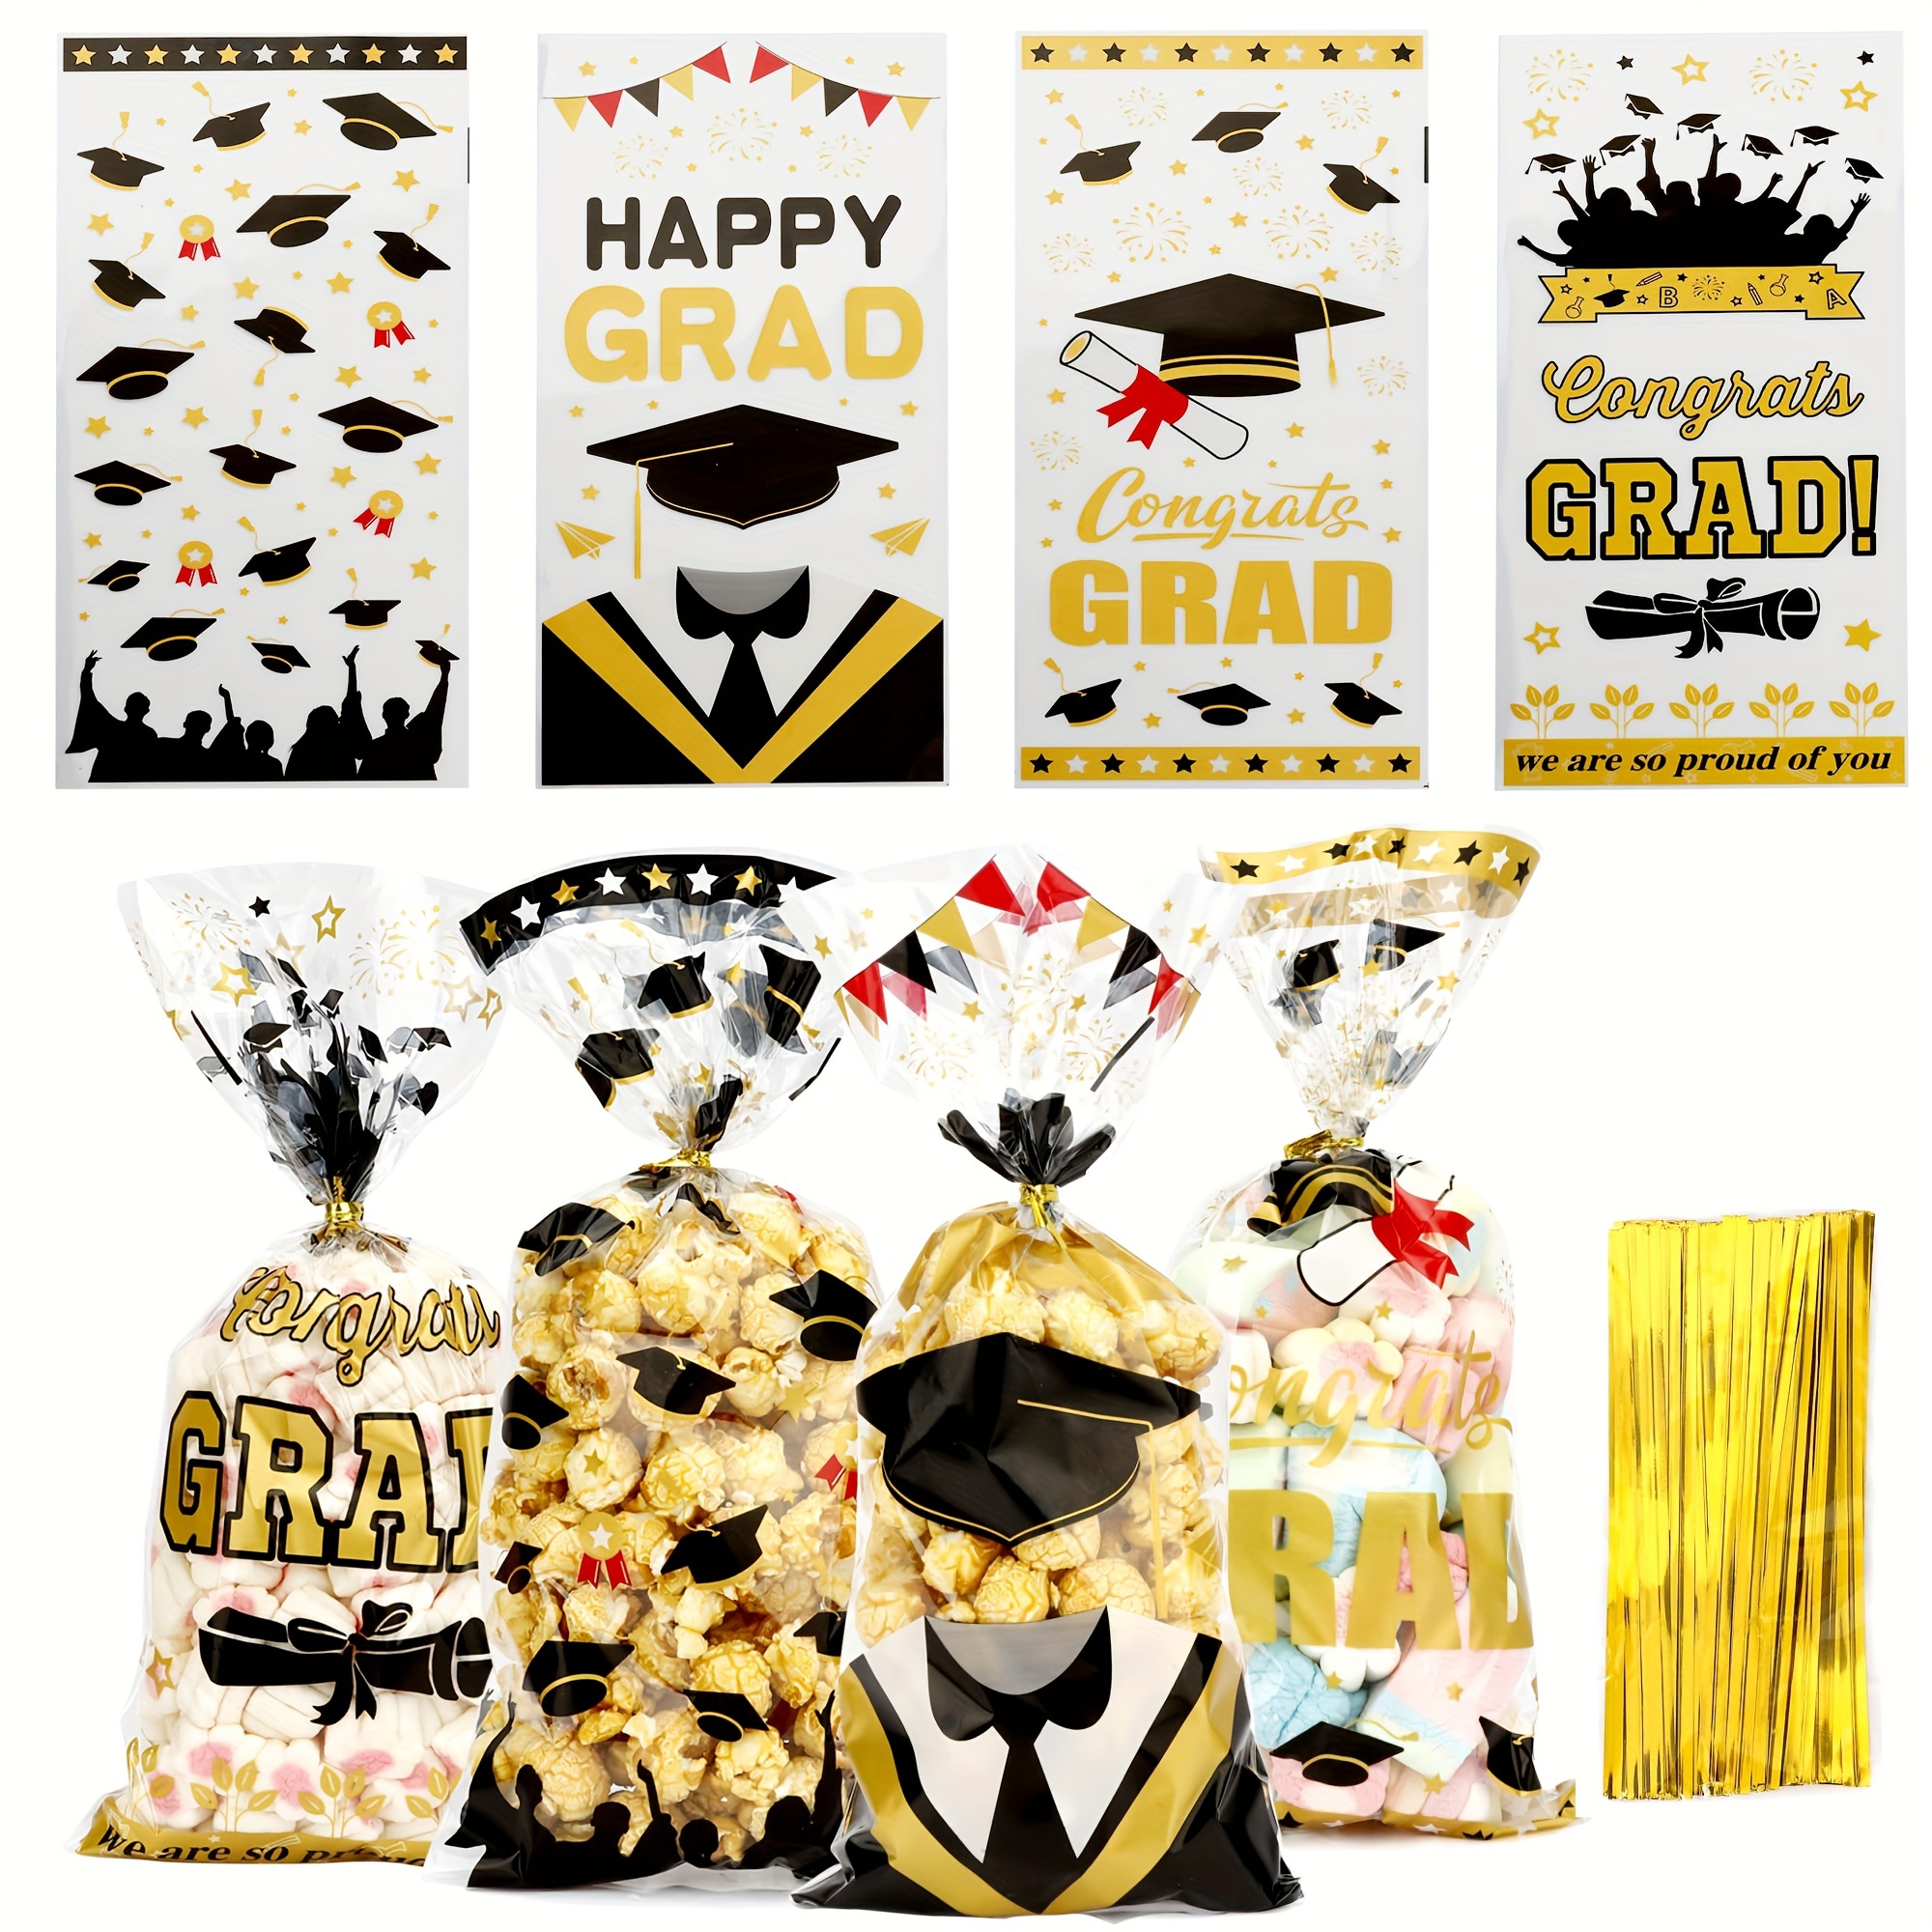 

50/100pcs Graduation Treat Bags, Graduation Cellophane Treat Bags Graduation Gift Bags, Graduation Candy Cookie Bags With Gold Ties For Graduation Party Favors Supplies (4 Styles)